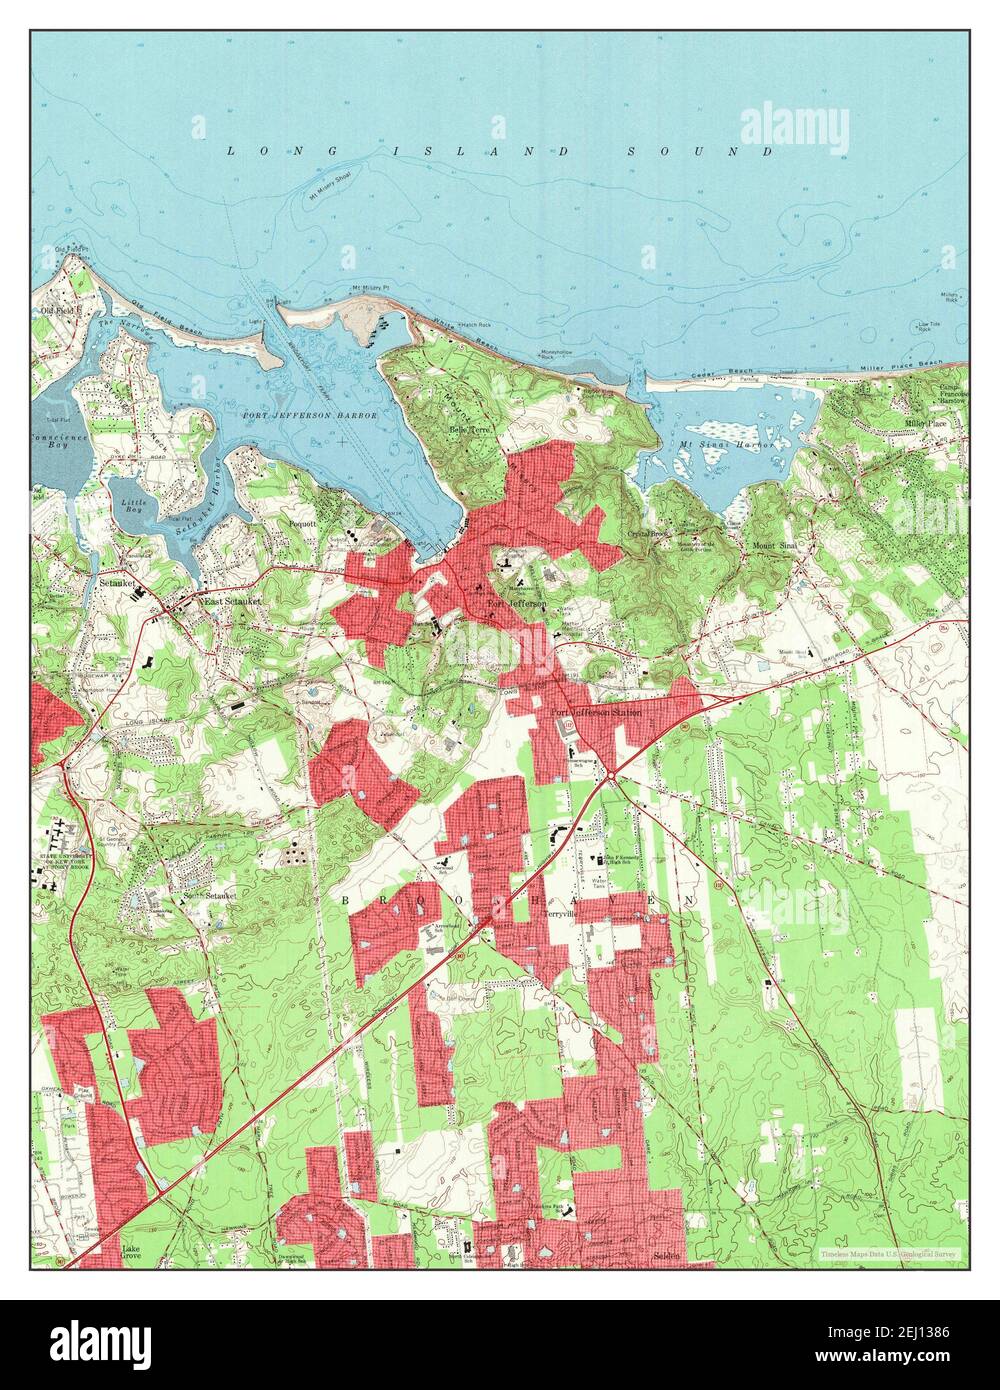 Port Jefferson, New York, map 1967, 1:24000, United States of America by Timeless Maps, data U.S. Geological Survey Stock Photo